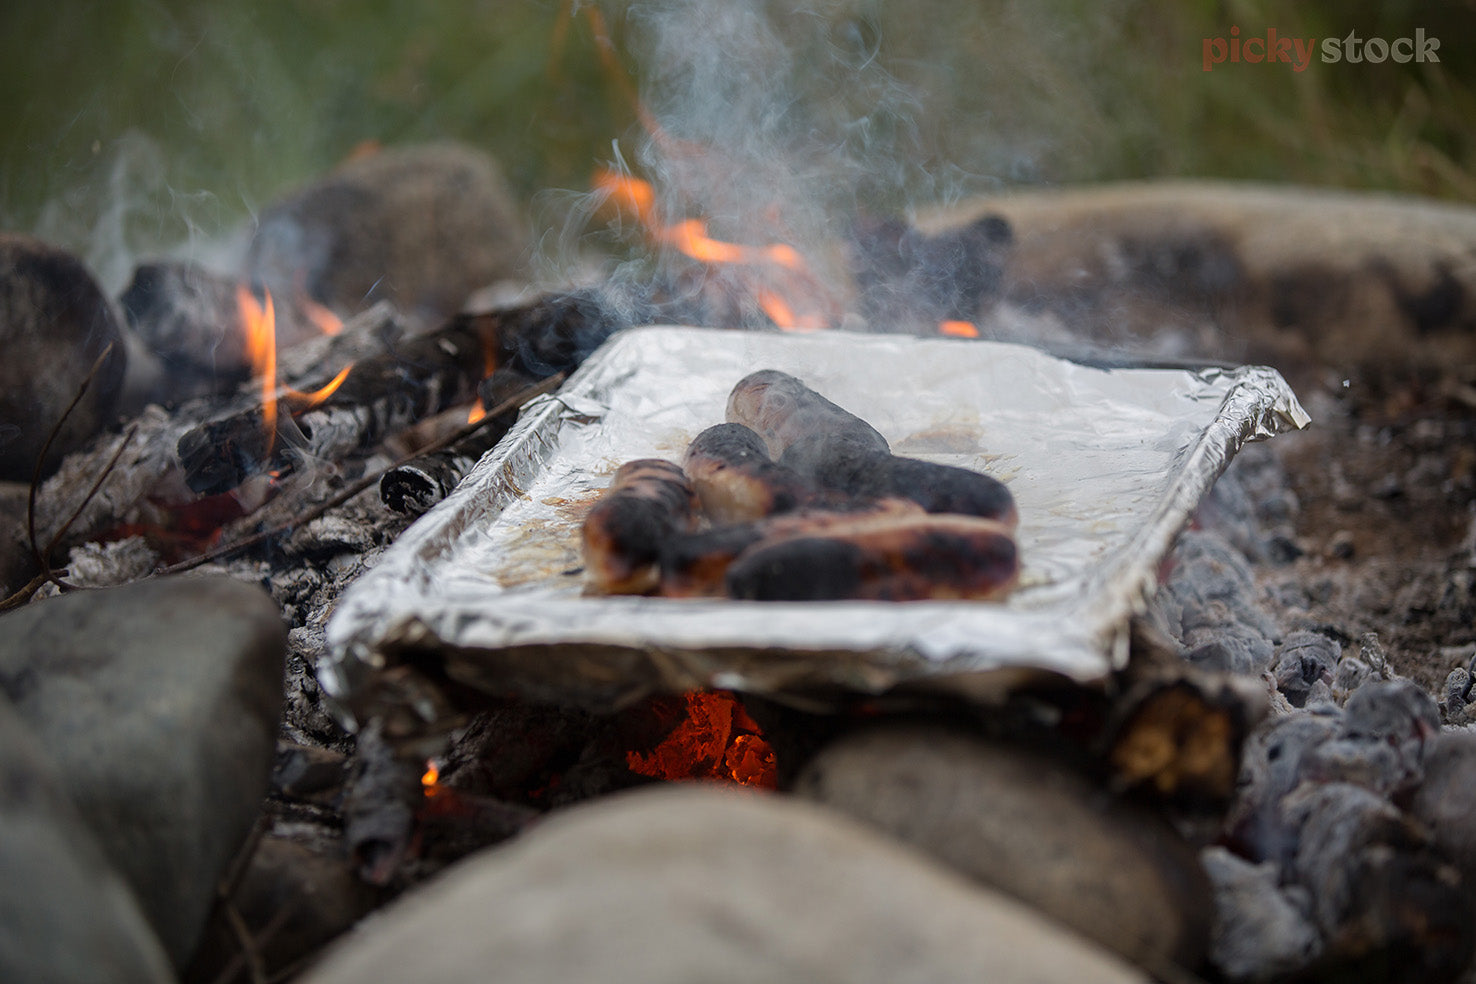 Sausages being cooked on an open outdoor fire. Sitting on a tinfoil tray. Smoke and hot amber flames visible. 